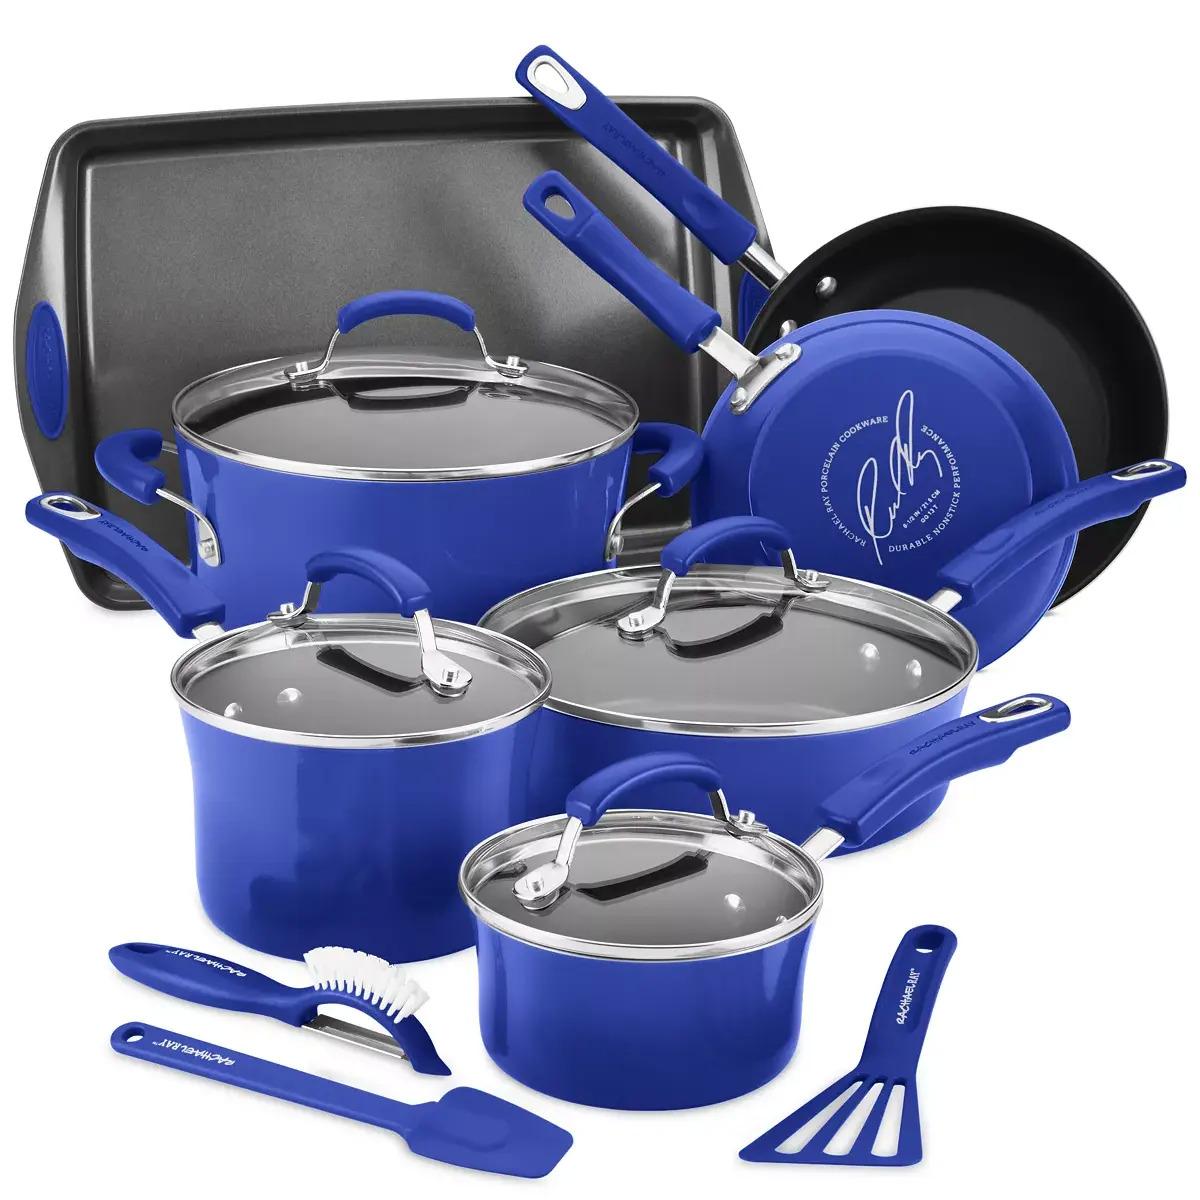 Rachael Ray Classic Brights Hard Enamel Nonstick Cookware Set for $89.99 Shipped